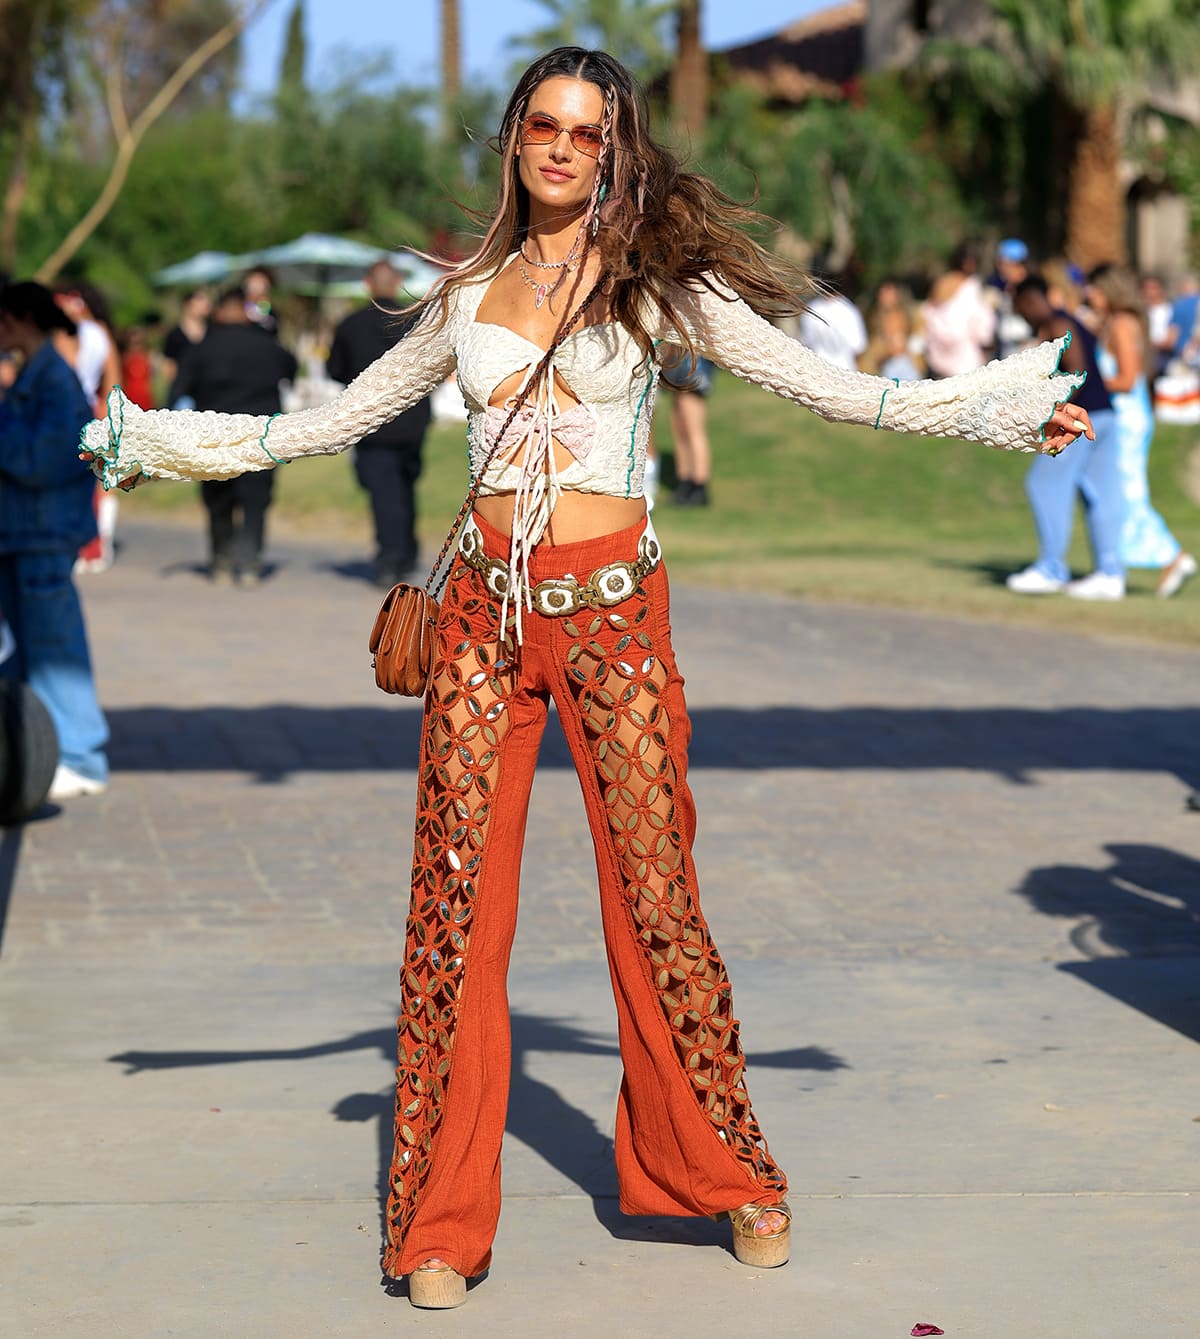 Alessandra Ambrosio showcases plenty of flesh in a hippie-inspired outfit composed of a Siedrés front-tie top and a pair of Raisa Vanessa burnt orange cutout pants